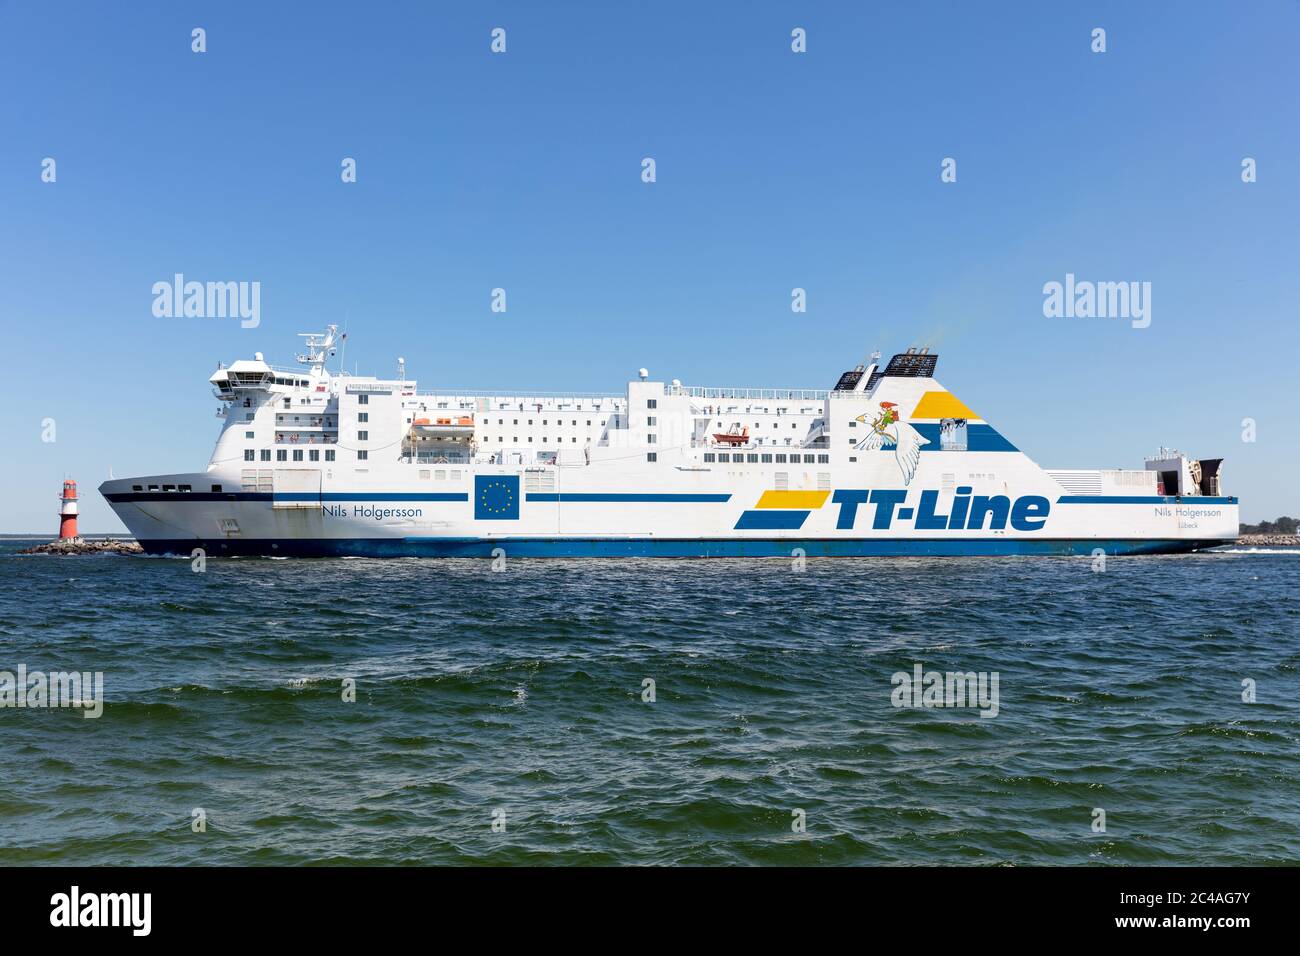 TT-Line ferry NILS HOLGERSSON outbound Rostock Stock Photo